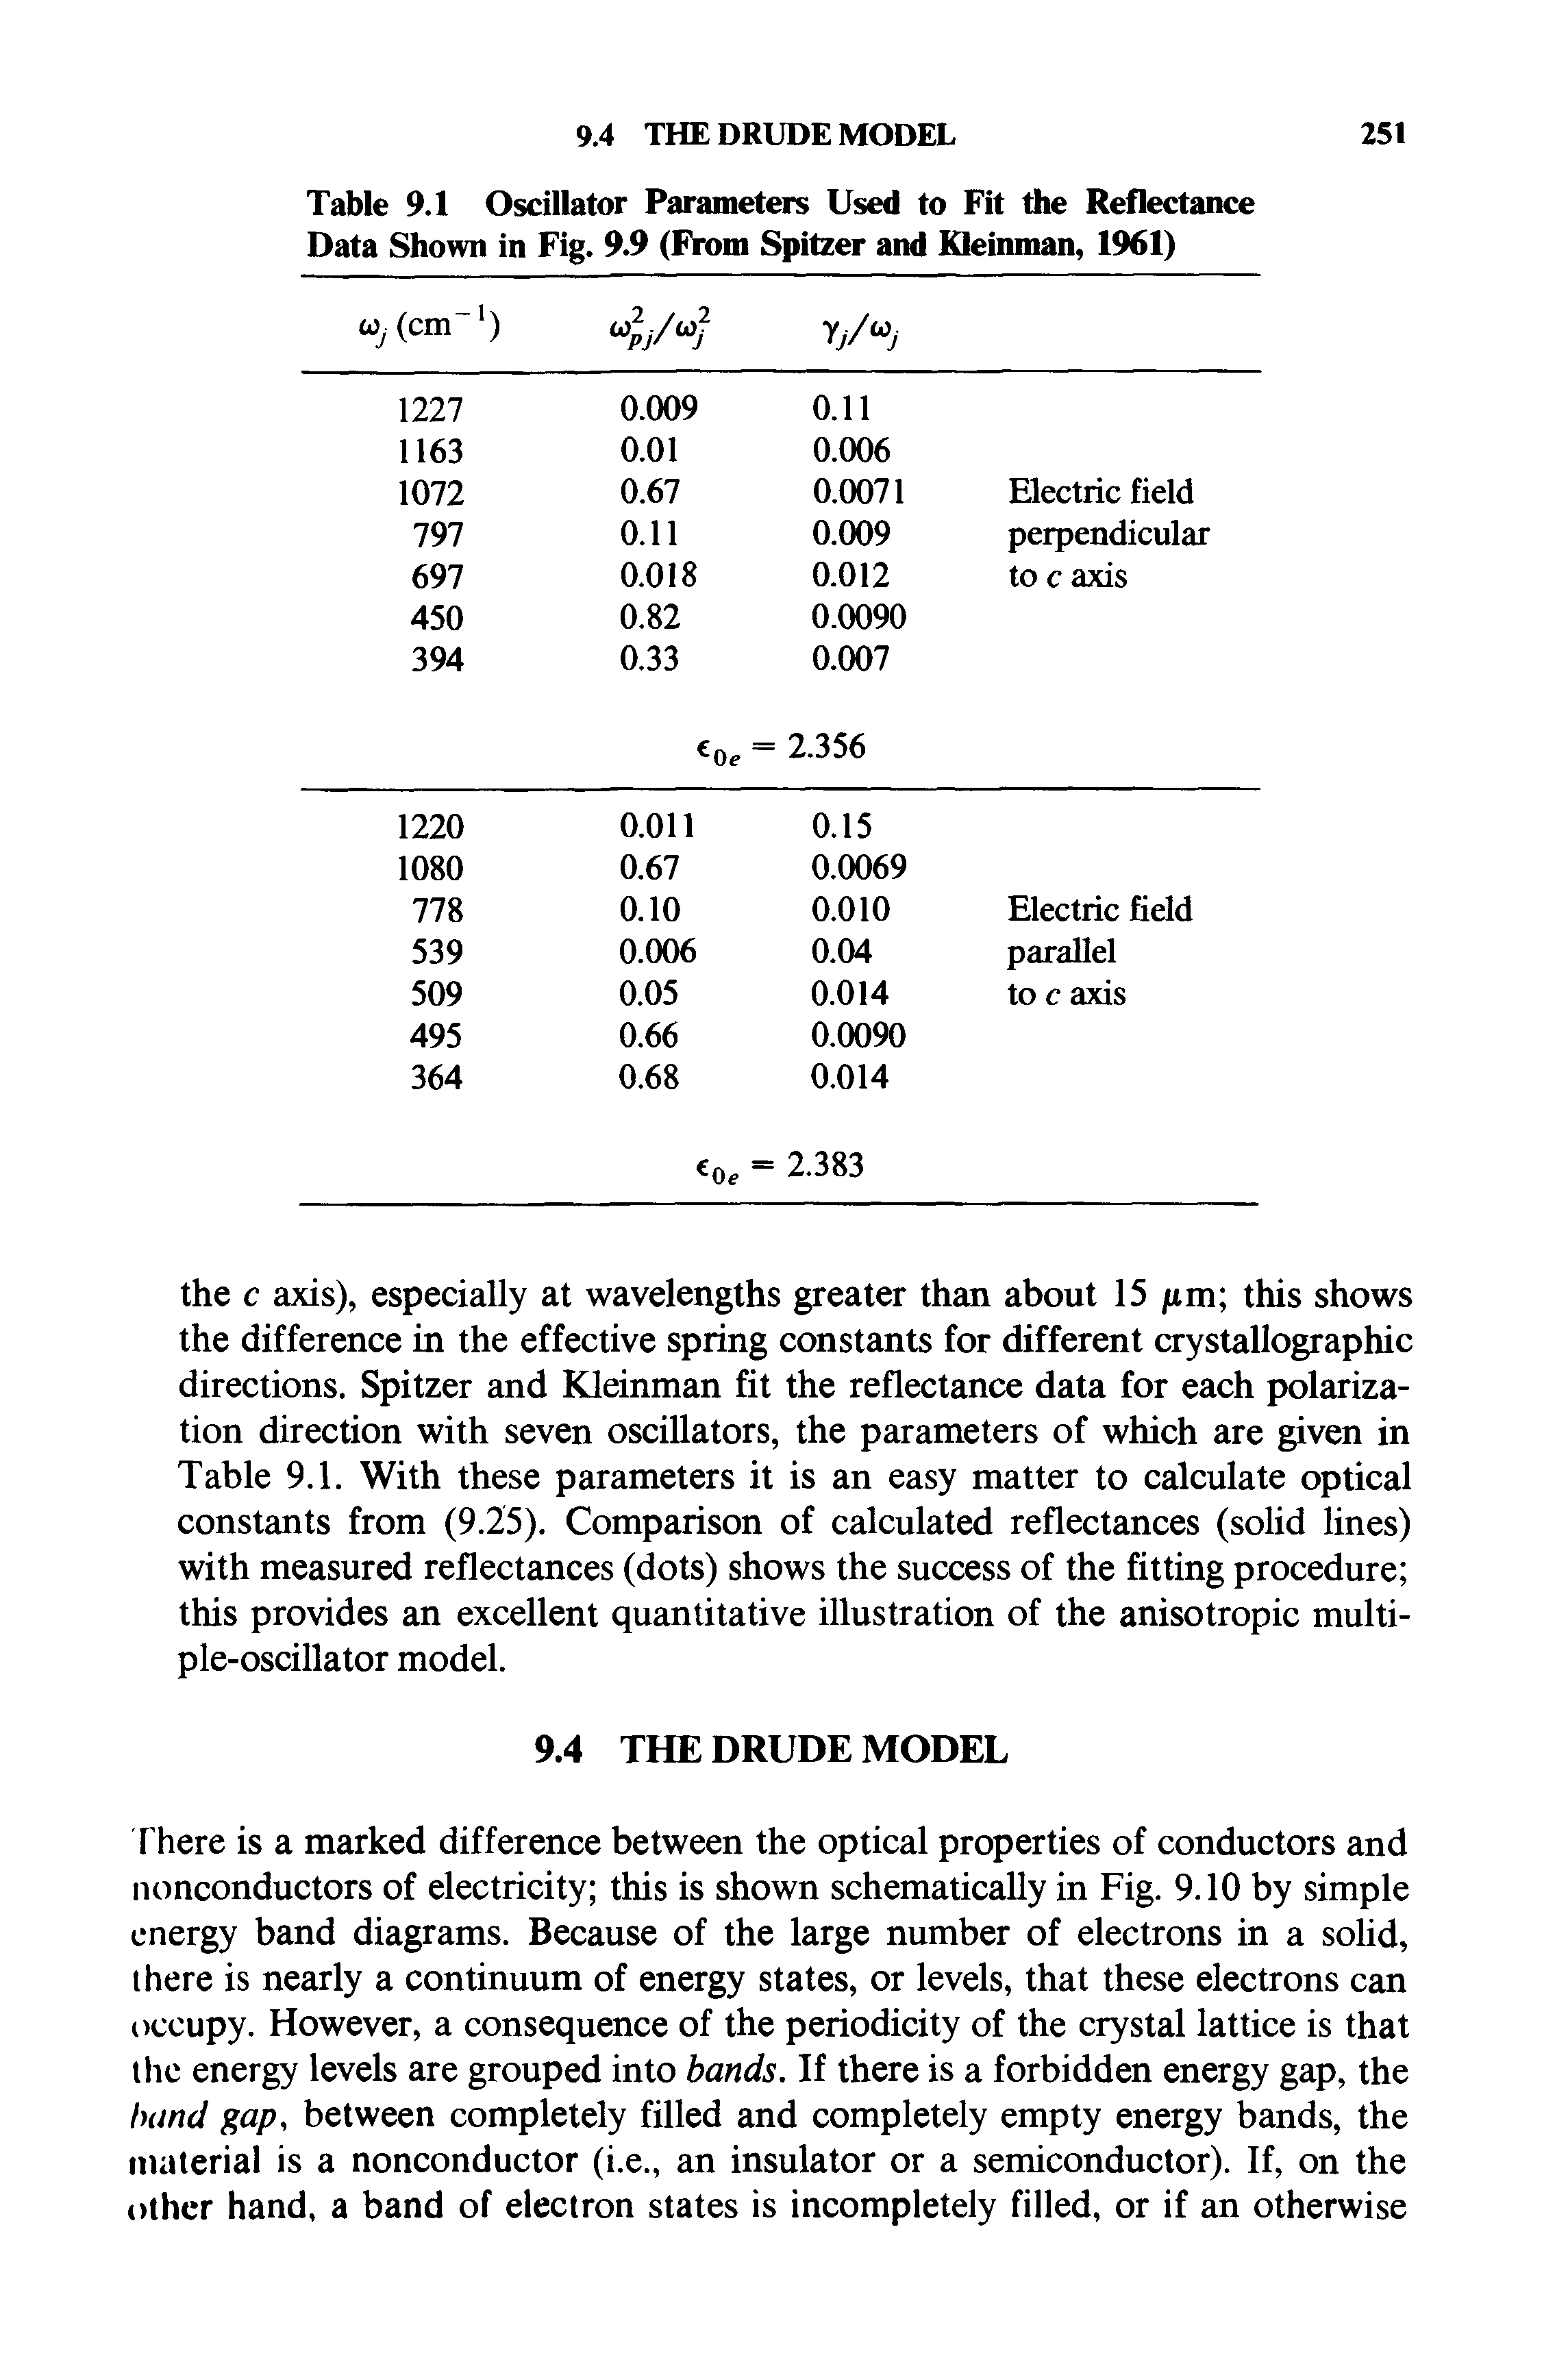 Table 9.1 Oscillator Parameters Used to Fit the Reflectance Data Shown in Fig. 9.9 (From Spitzer and Kleinman, 1961)...